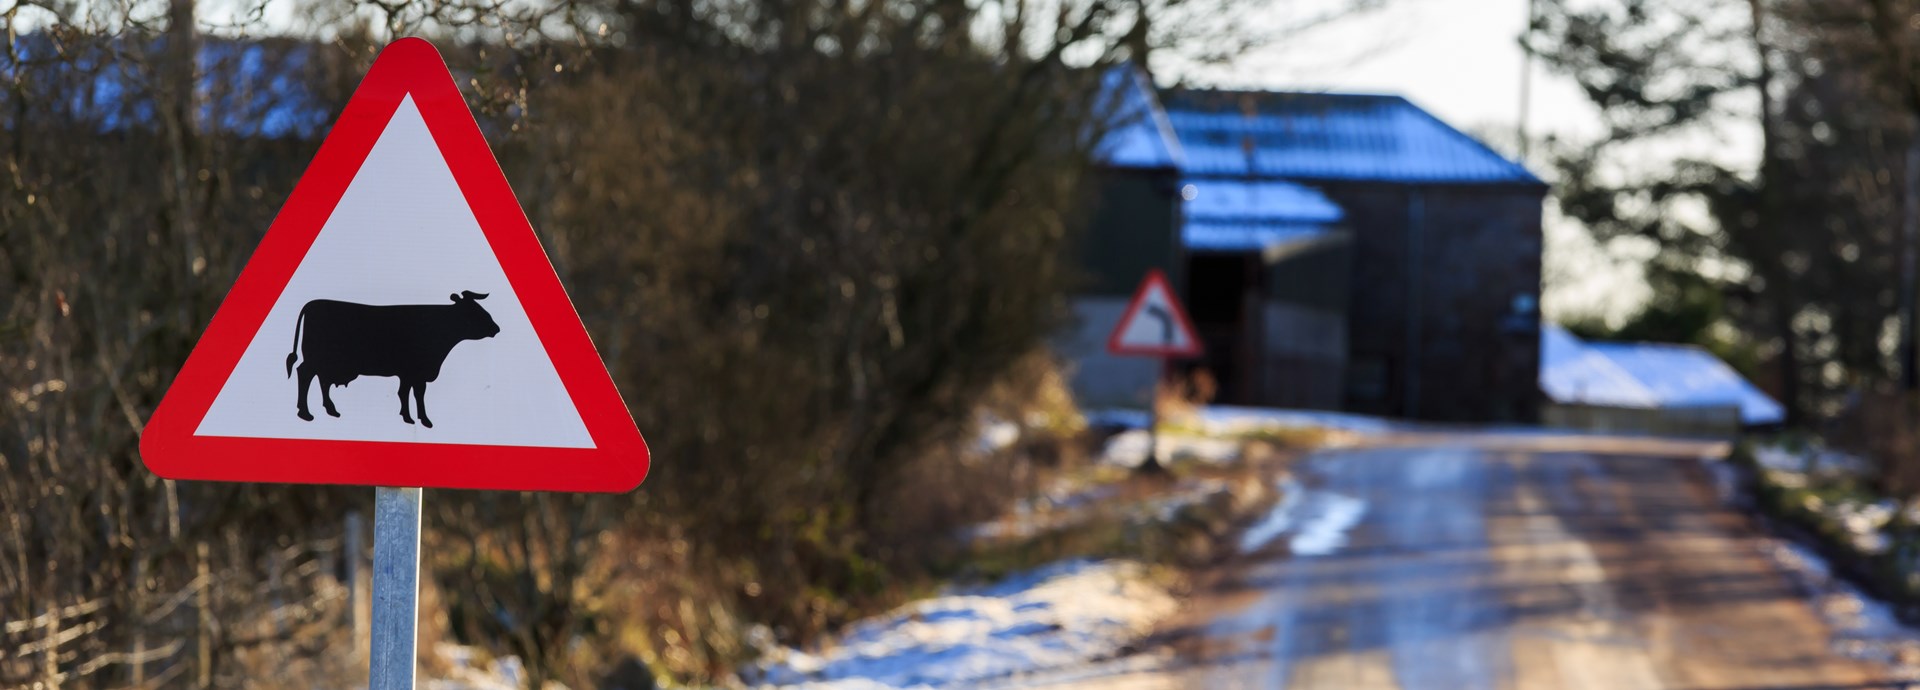 Road sign warning of farm animals in snowy weather